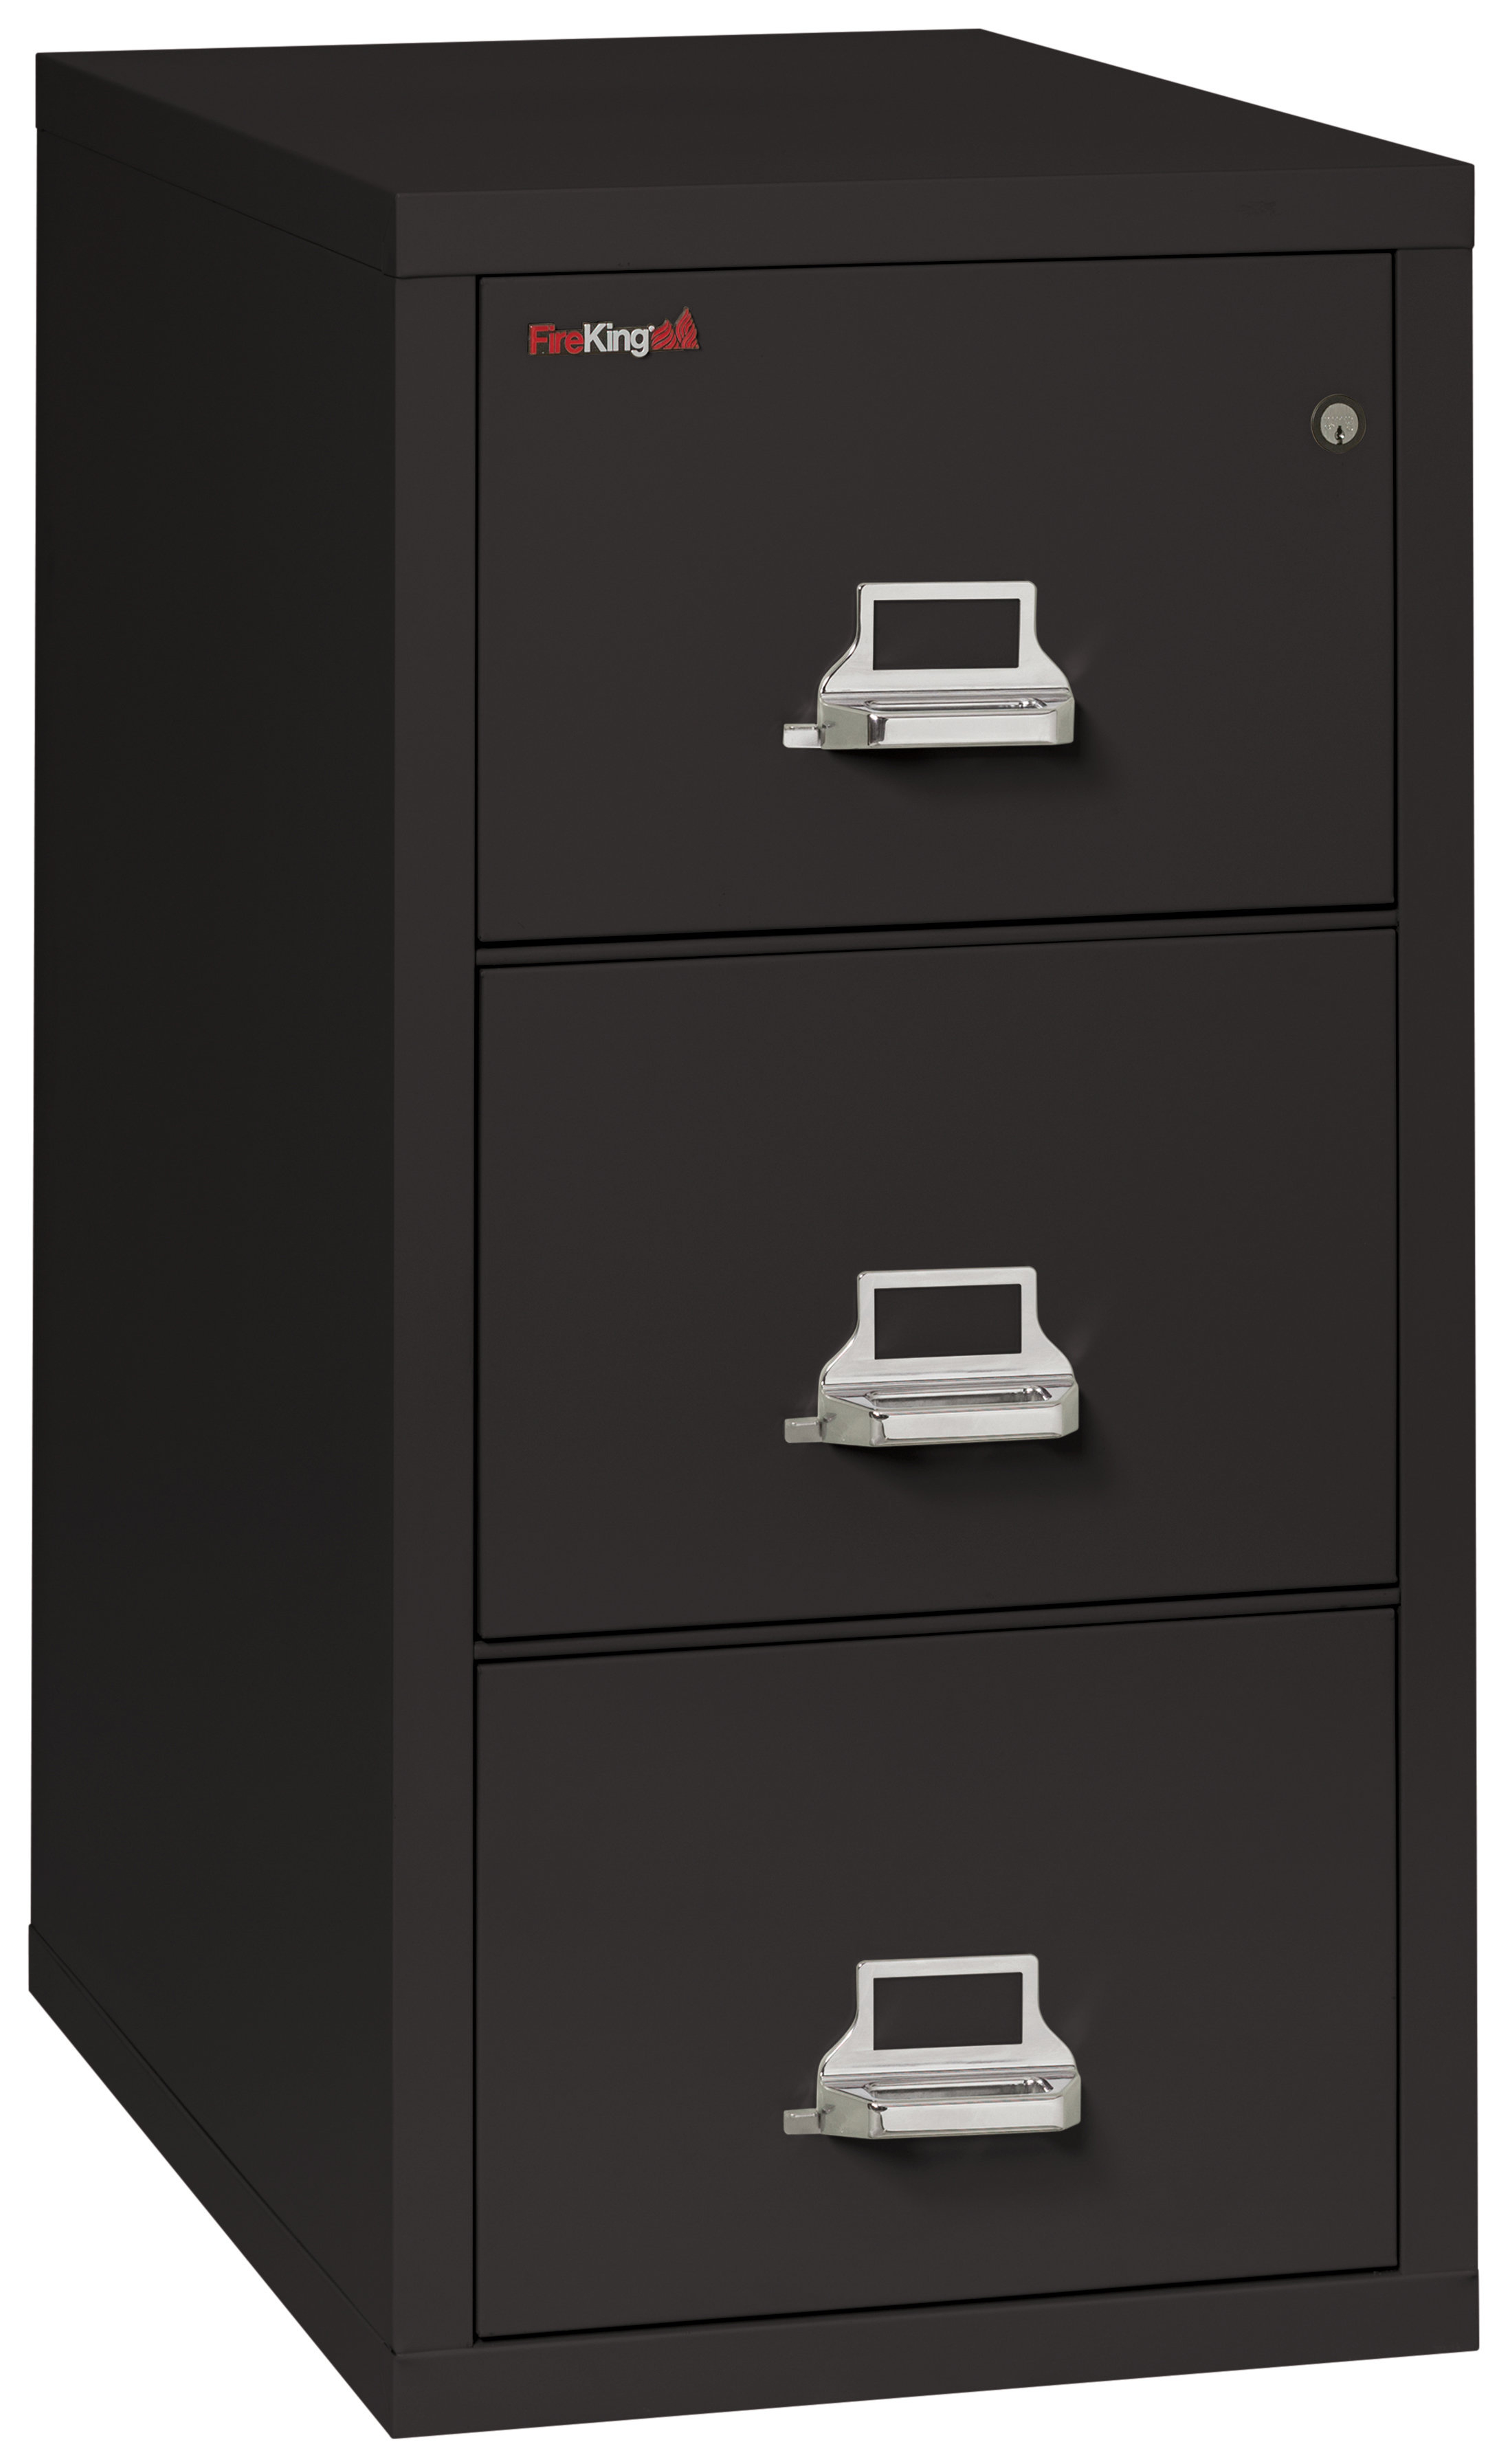 Fireproof 3 Drawer Vertical File Cabinet in size 2197 X 3585